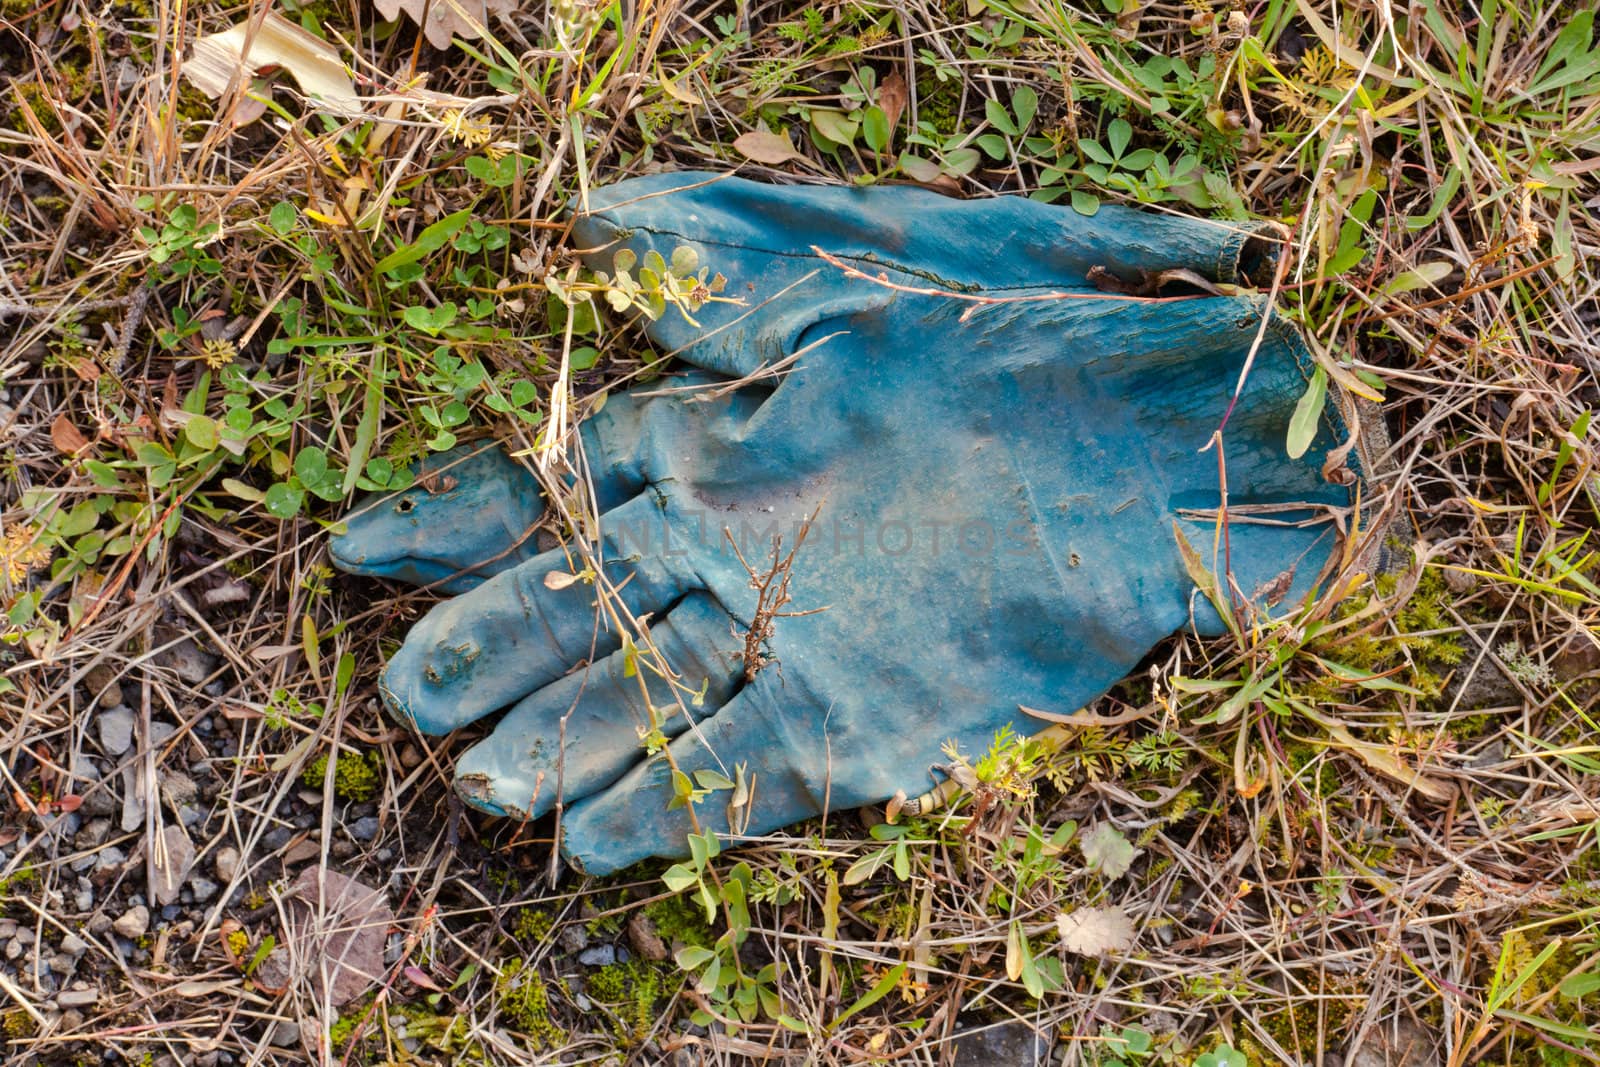 Disposed blue protective rubber glove slowly decomposing among vegetation.